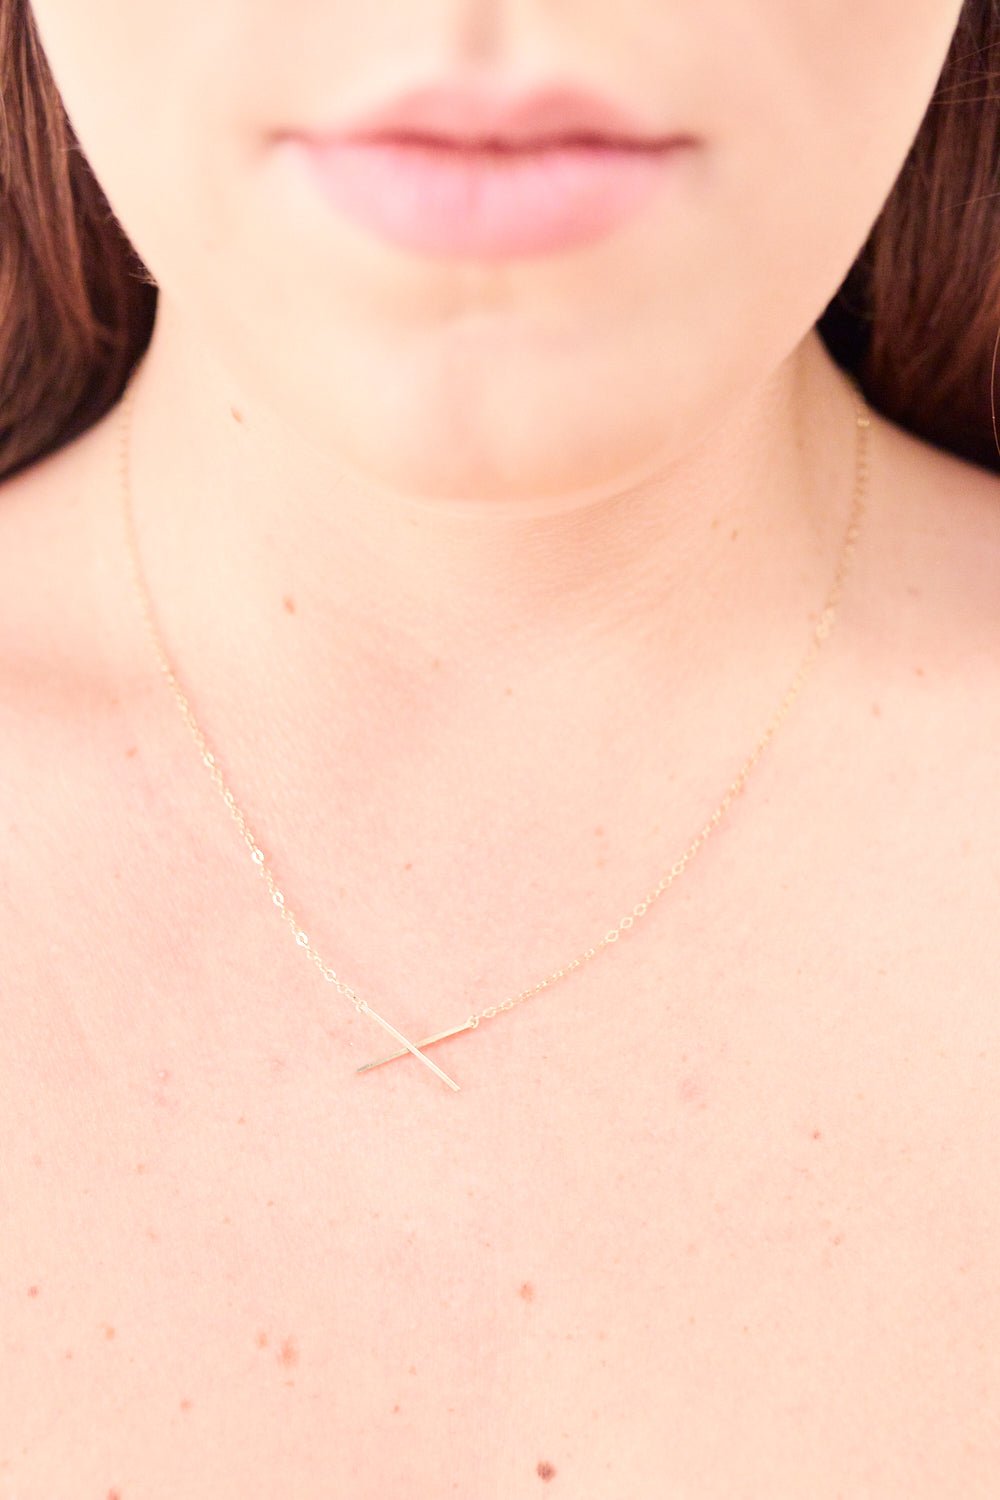 X Necklace - Driftwood Maui & Home By Driftwood